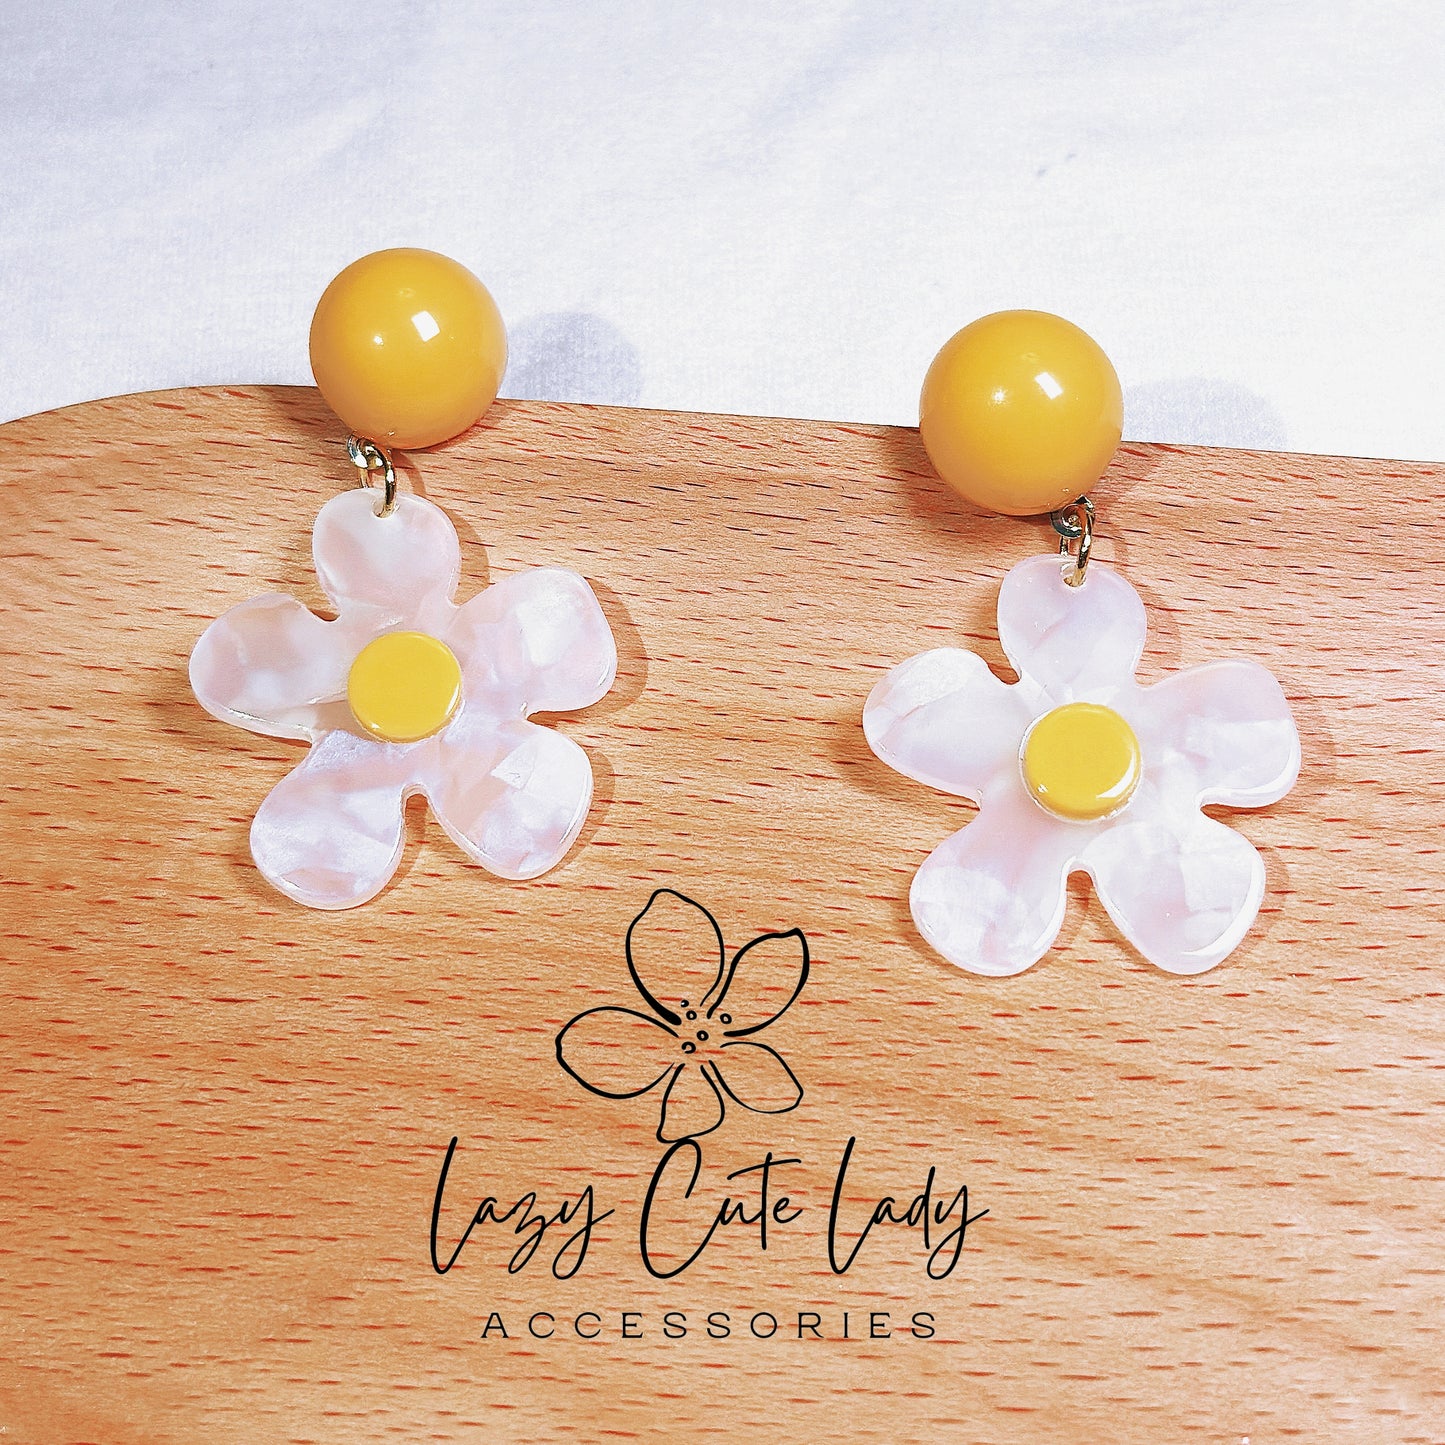 Vintage Blossom: Handcrafted White and Yellow Floral Earrings